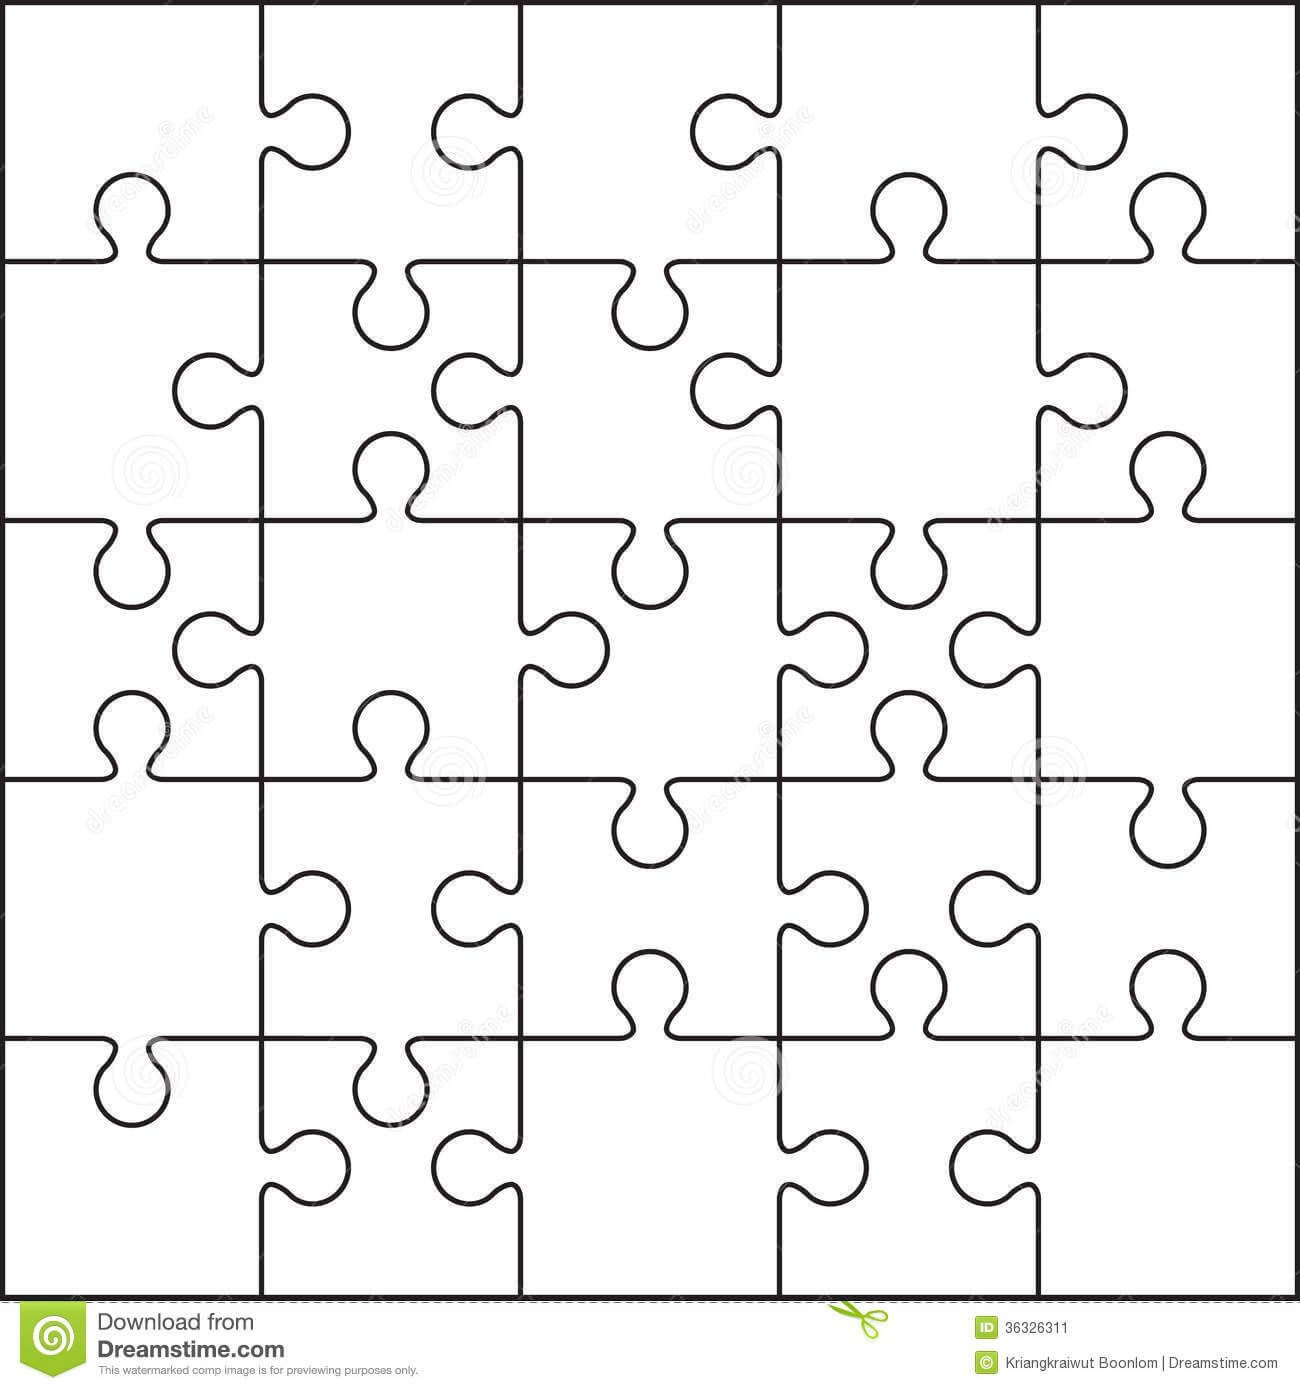 25 Jigsaw Puzzle Blank Template – Download From Over 66 Within Blank Jigsaw Piece Template